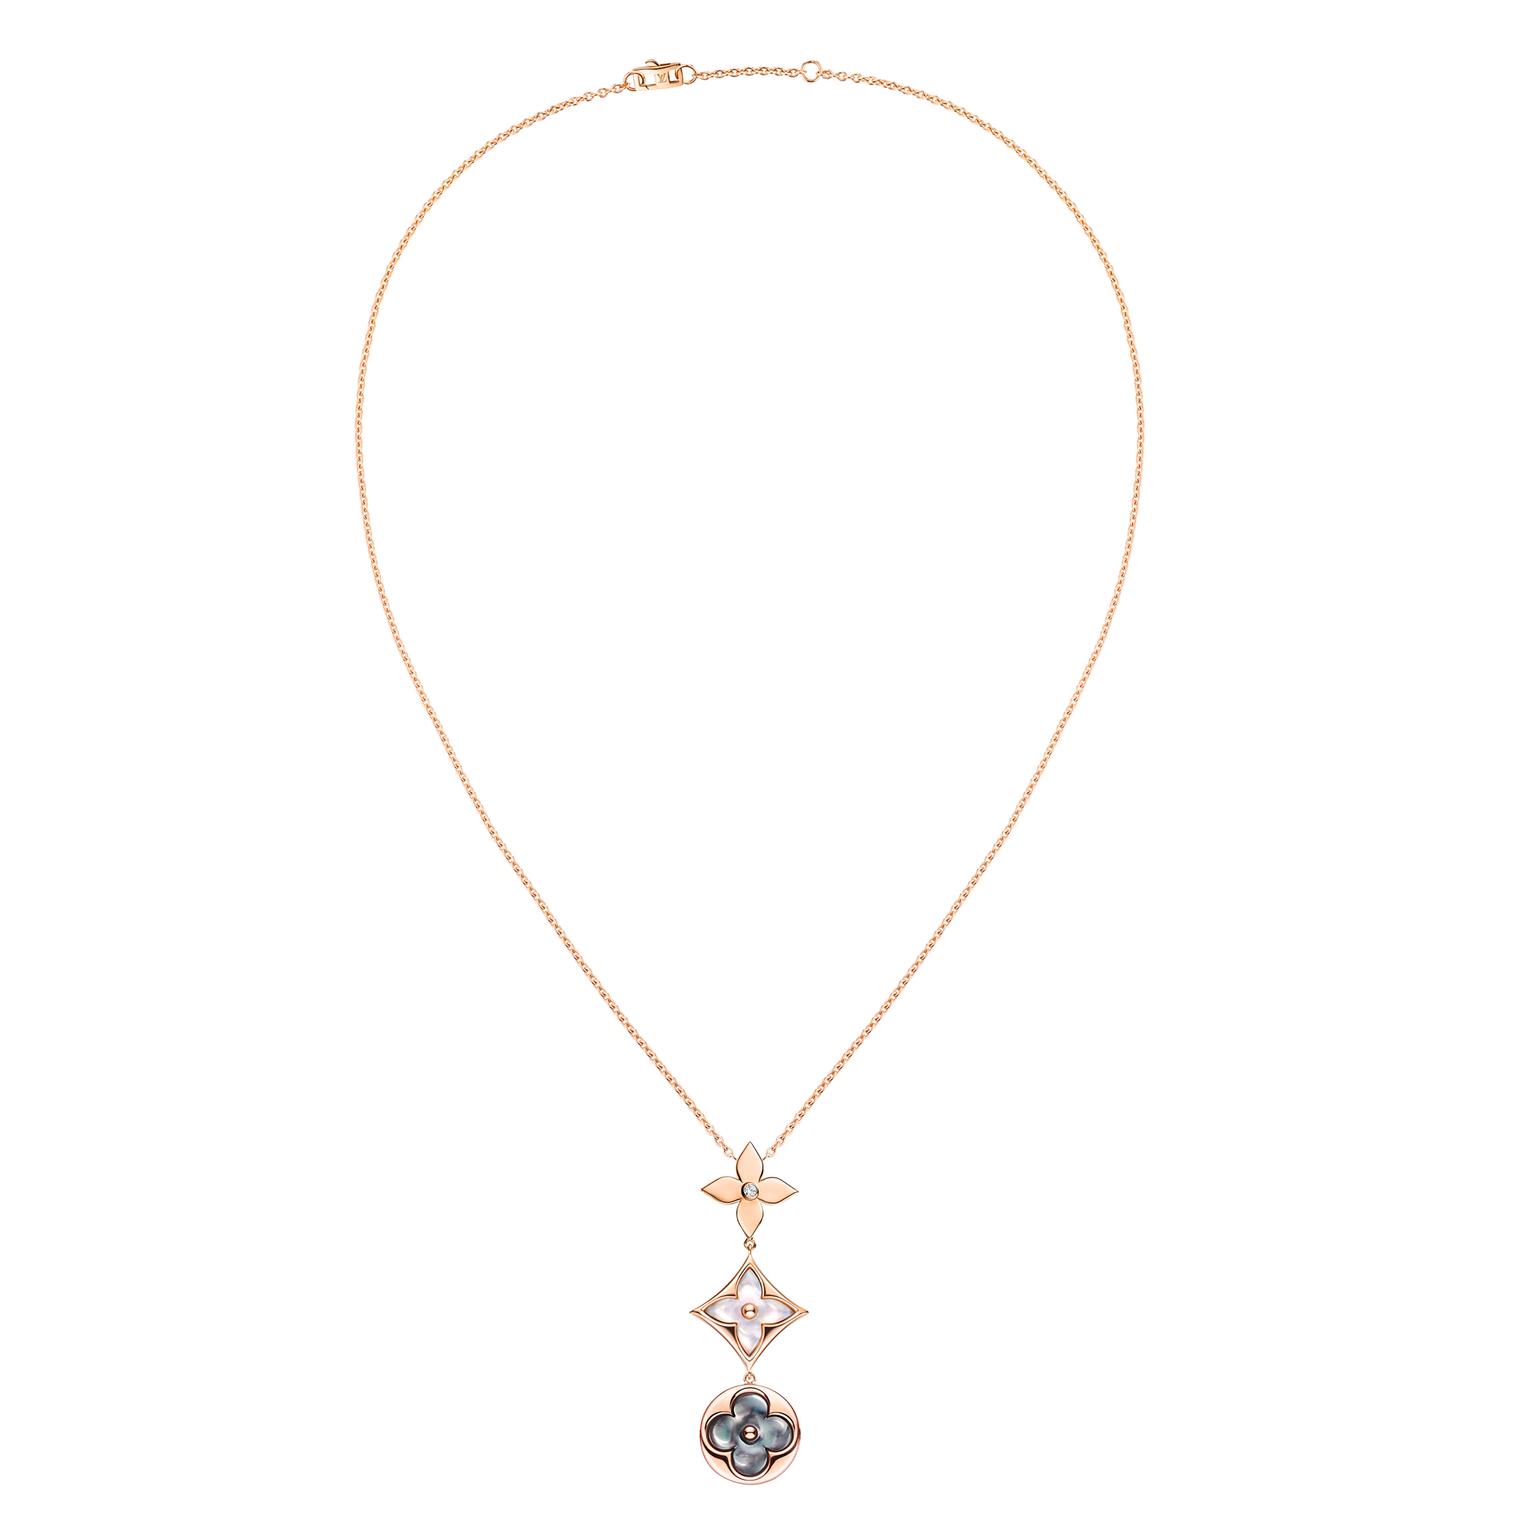 Blossom mother–of-pearl necklace, Louis Vuitton